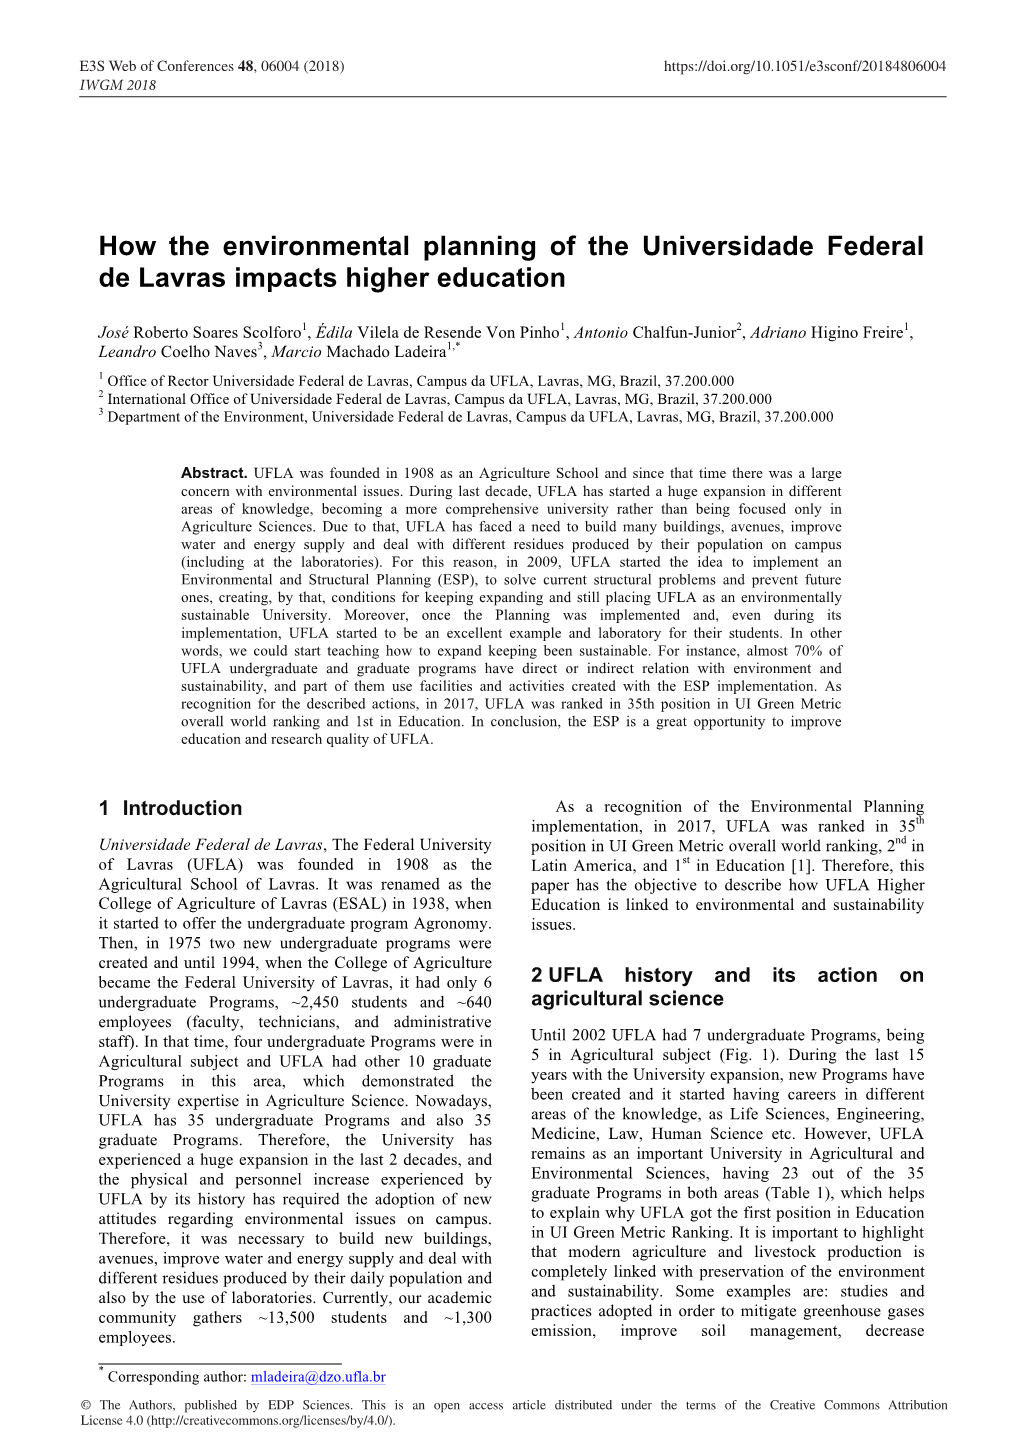 How the Environmental Planning of the Universidade Federal De Lavras Impacts Higher Education